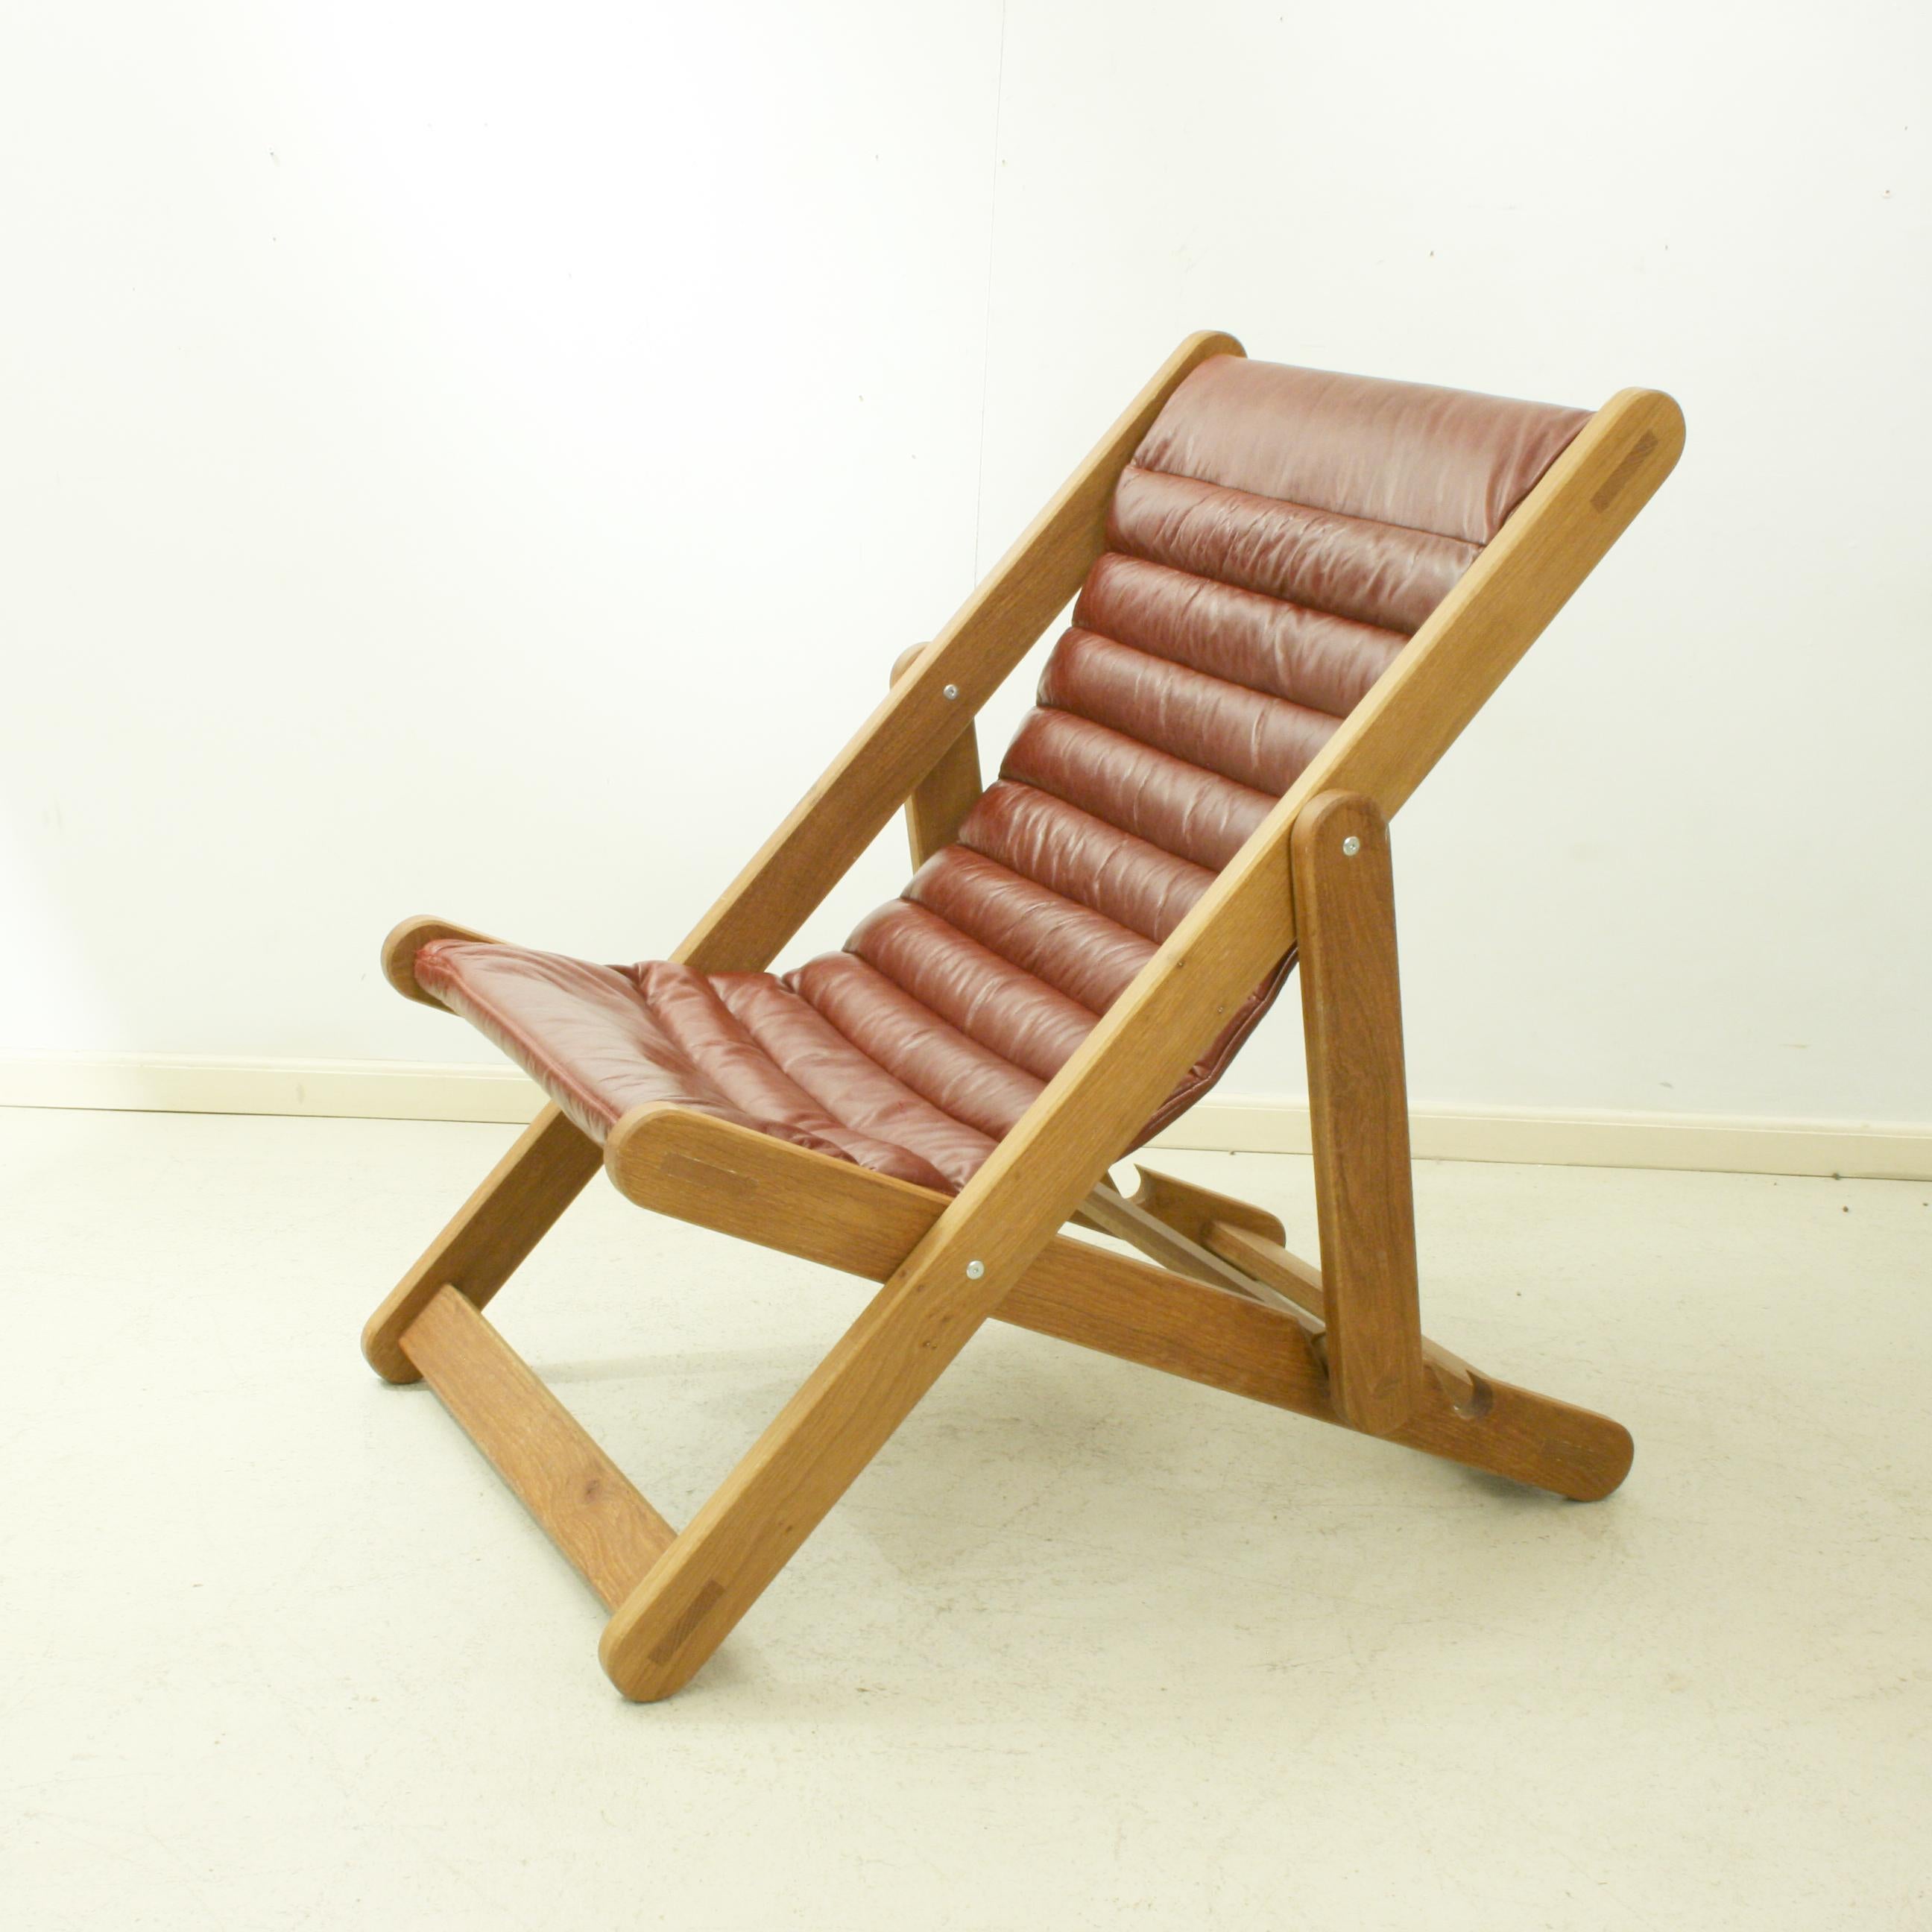 British Leather and Oak Deck Chair, Library Chair. For Sale